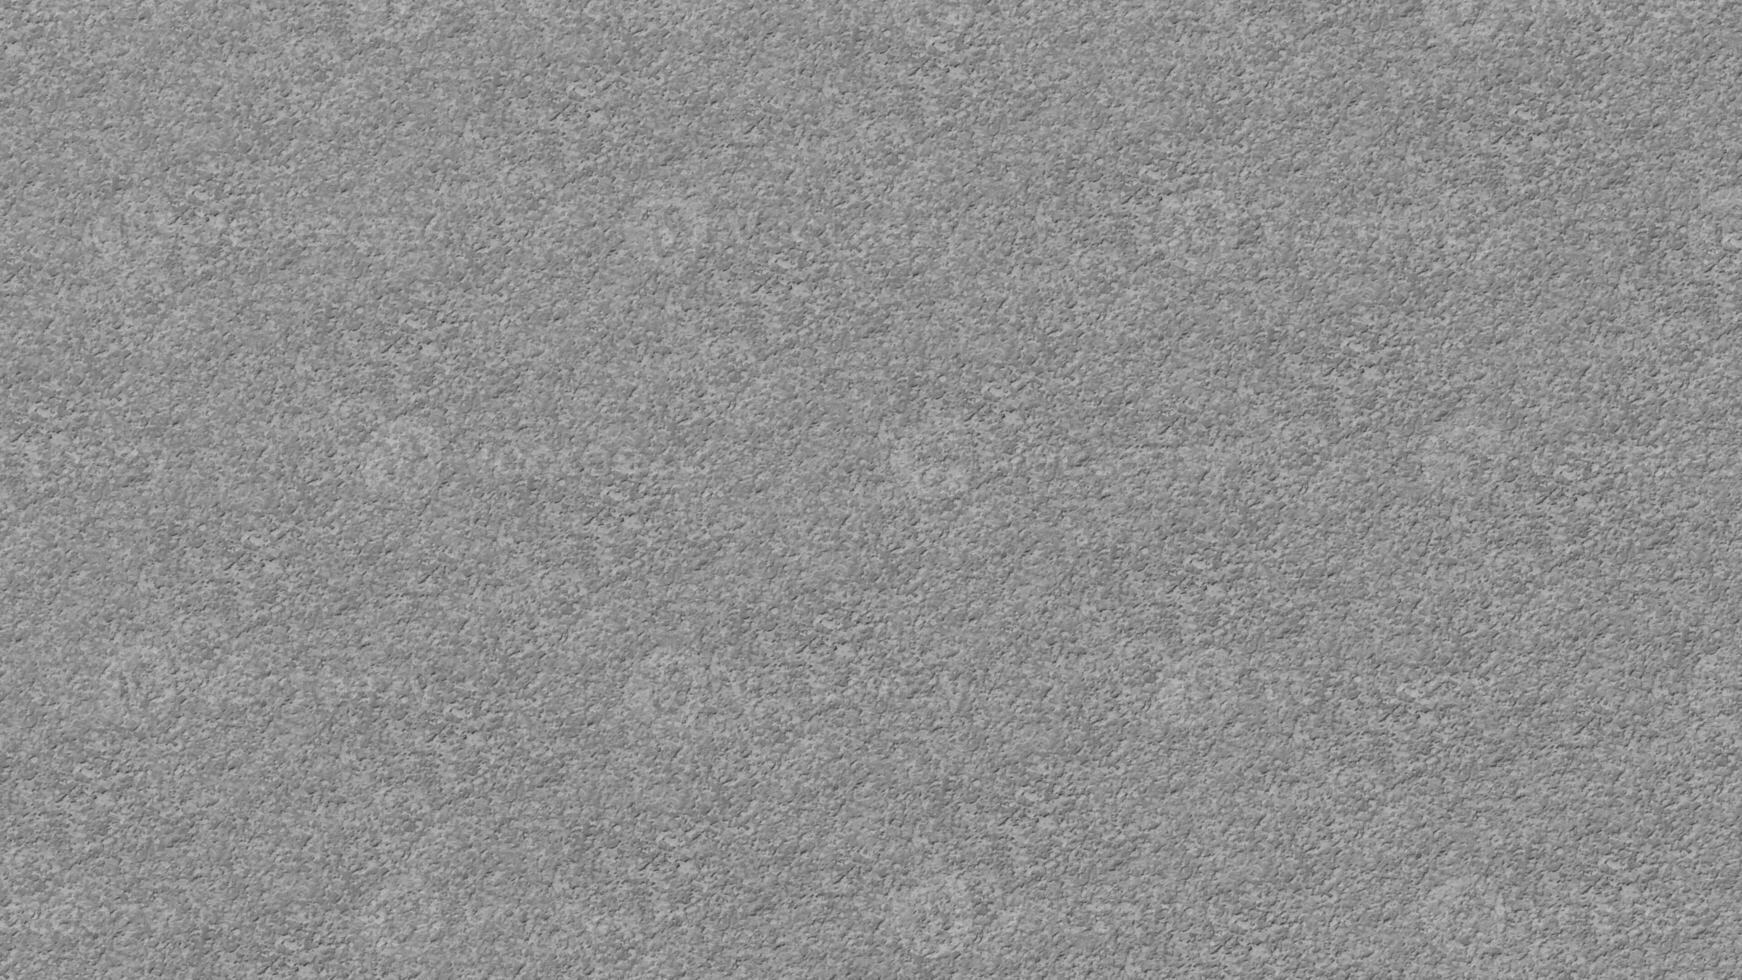 Stone texture gray for background or cover photo